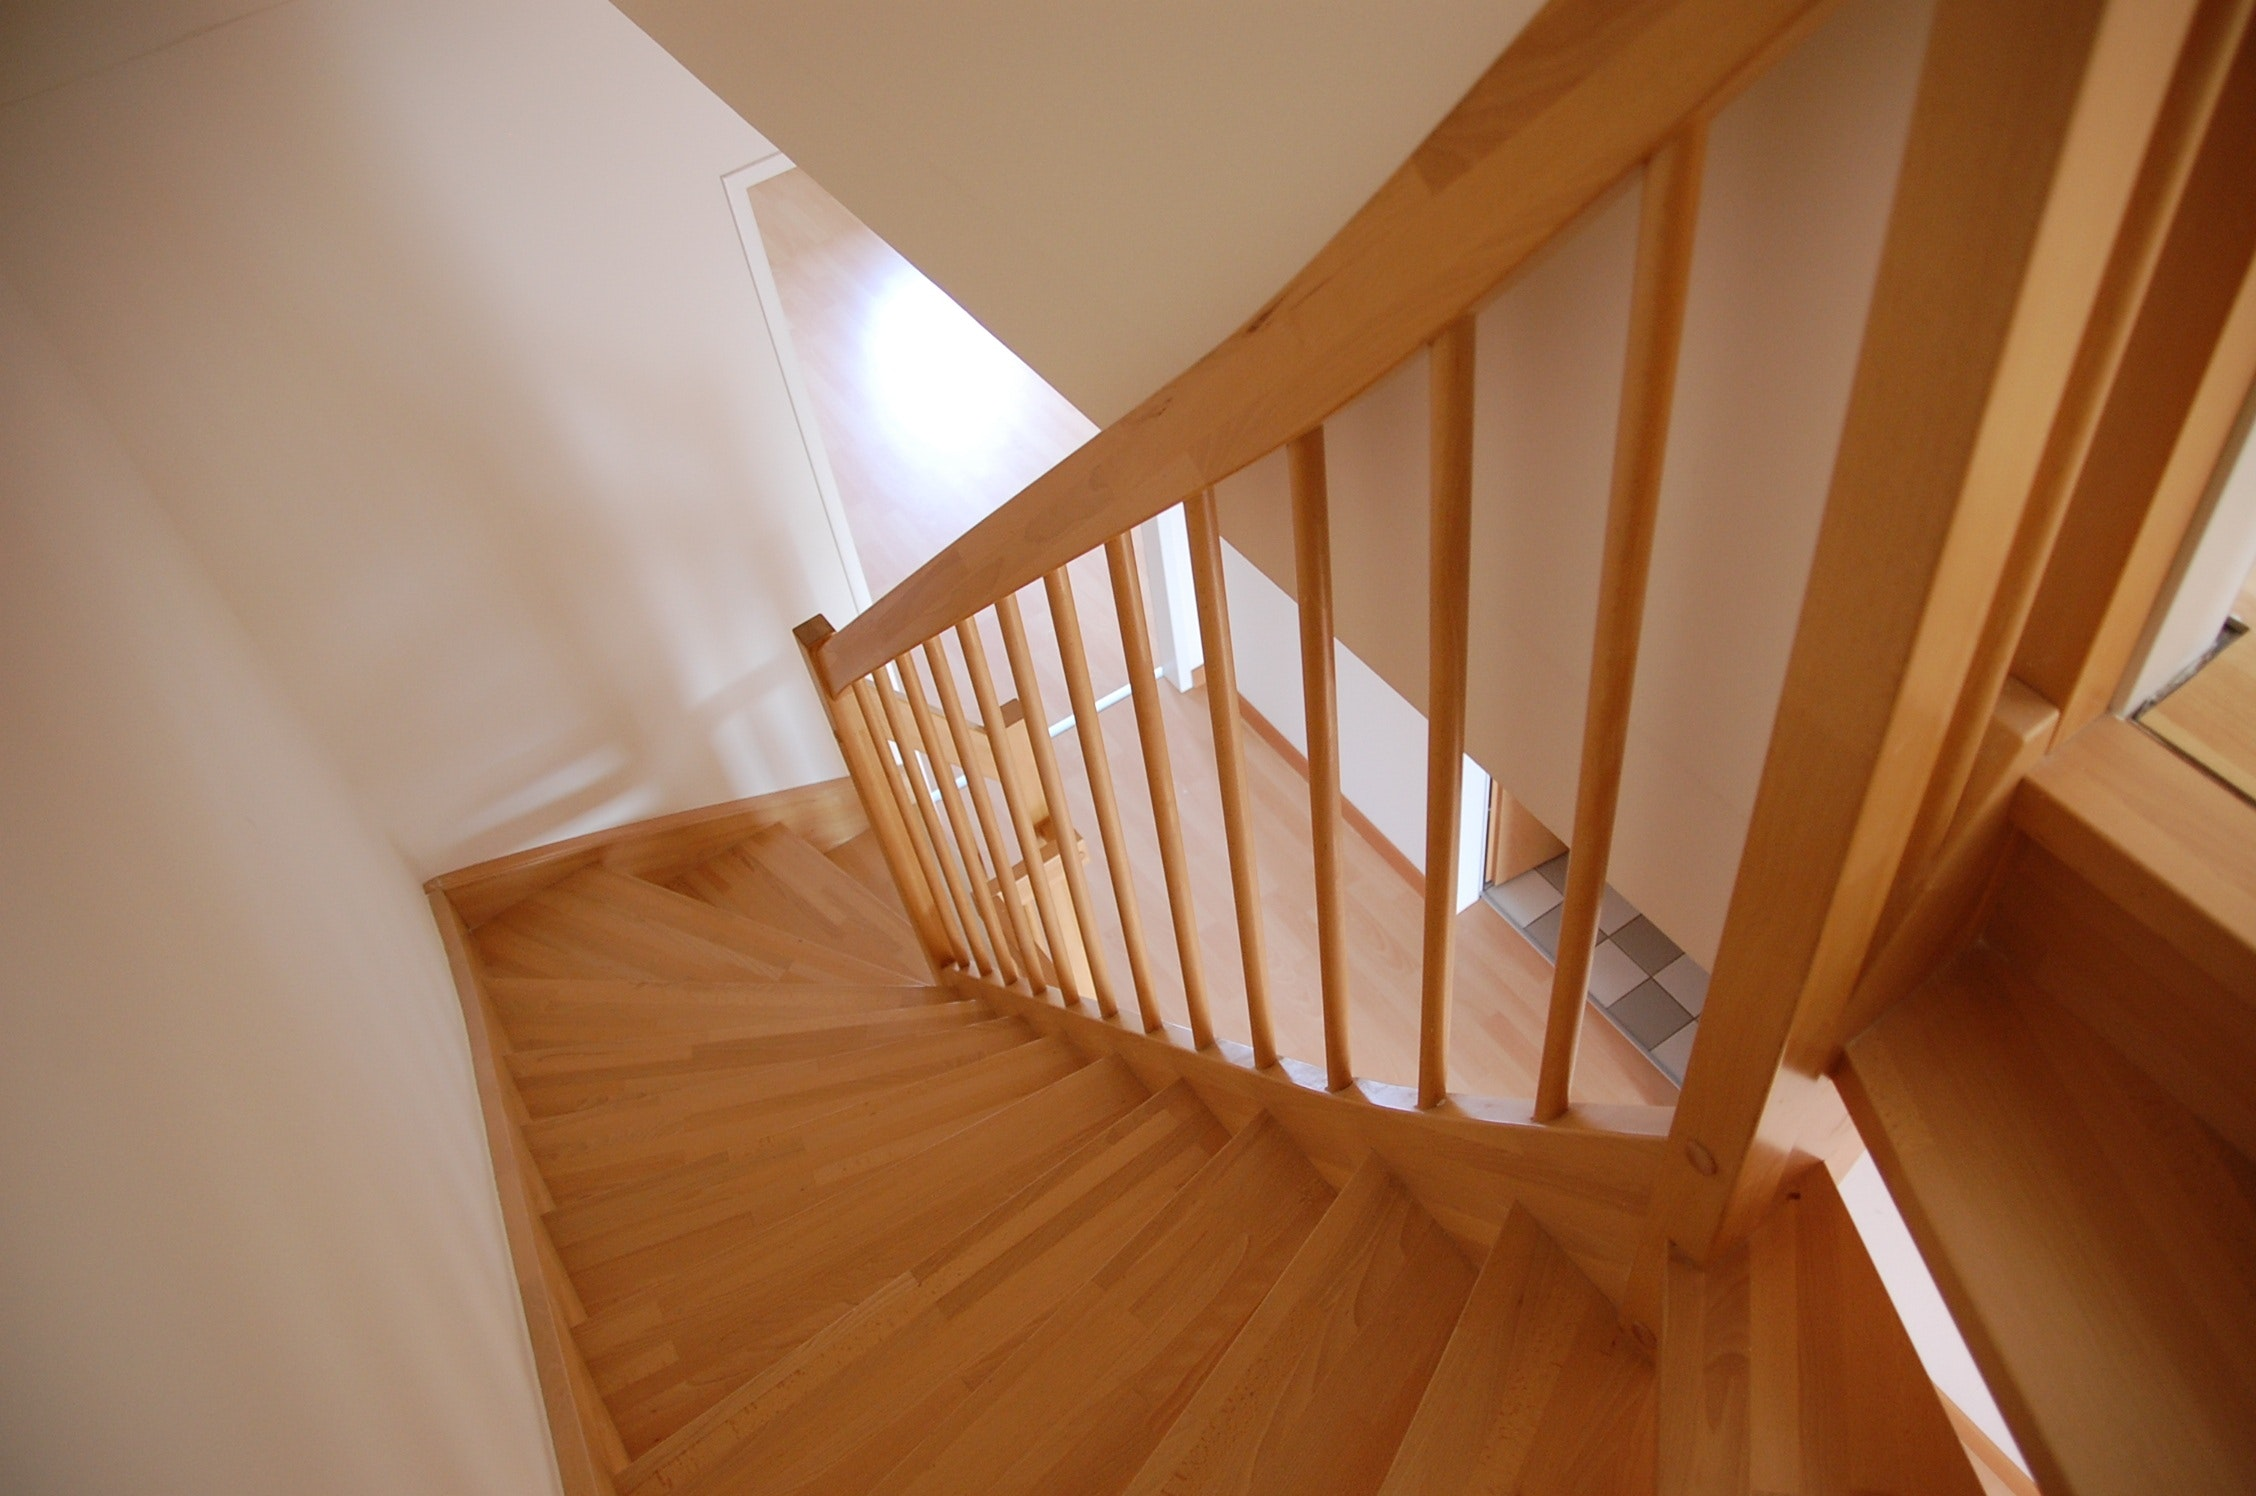 A person installing laminate planks on a staircase